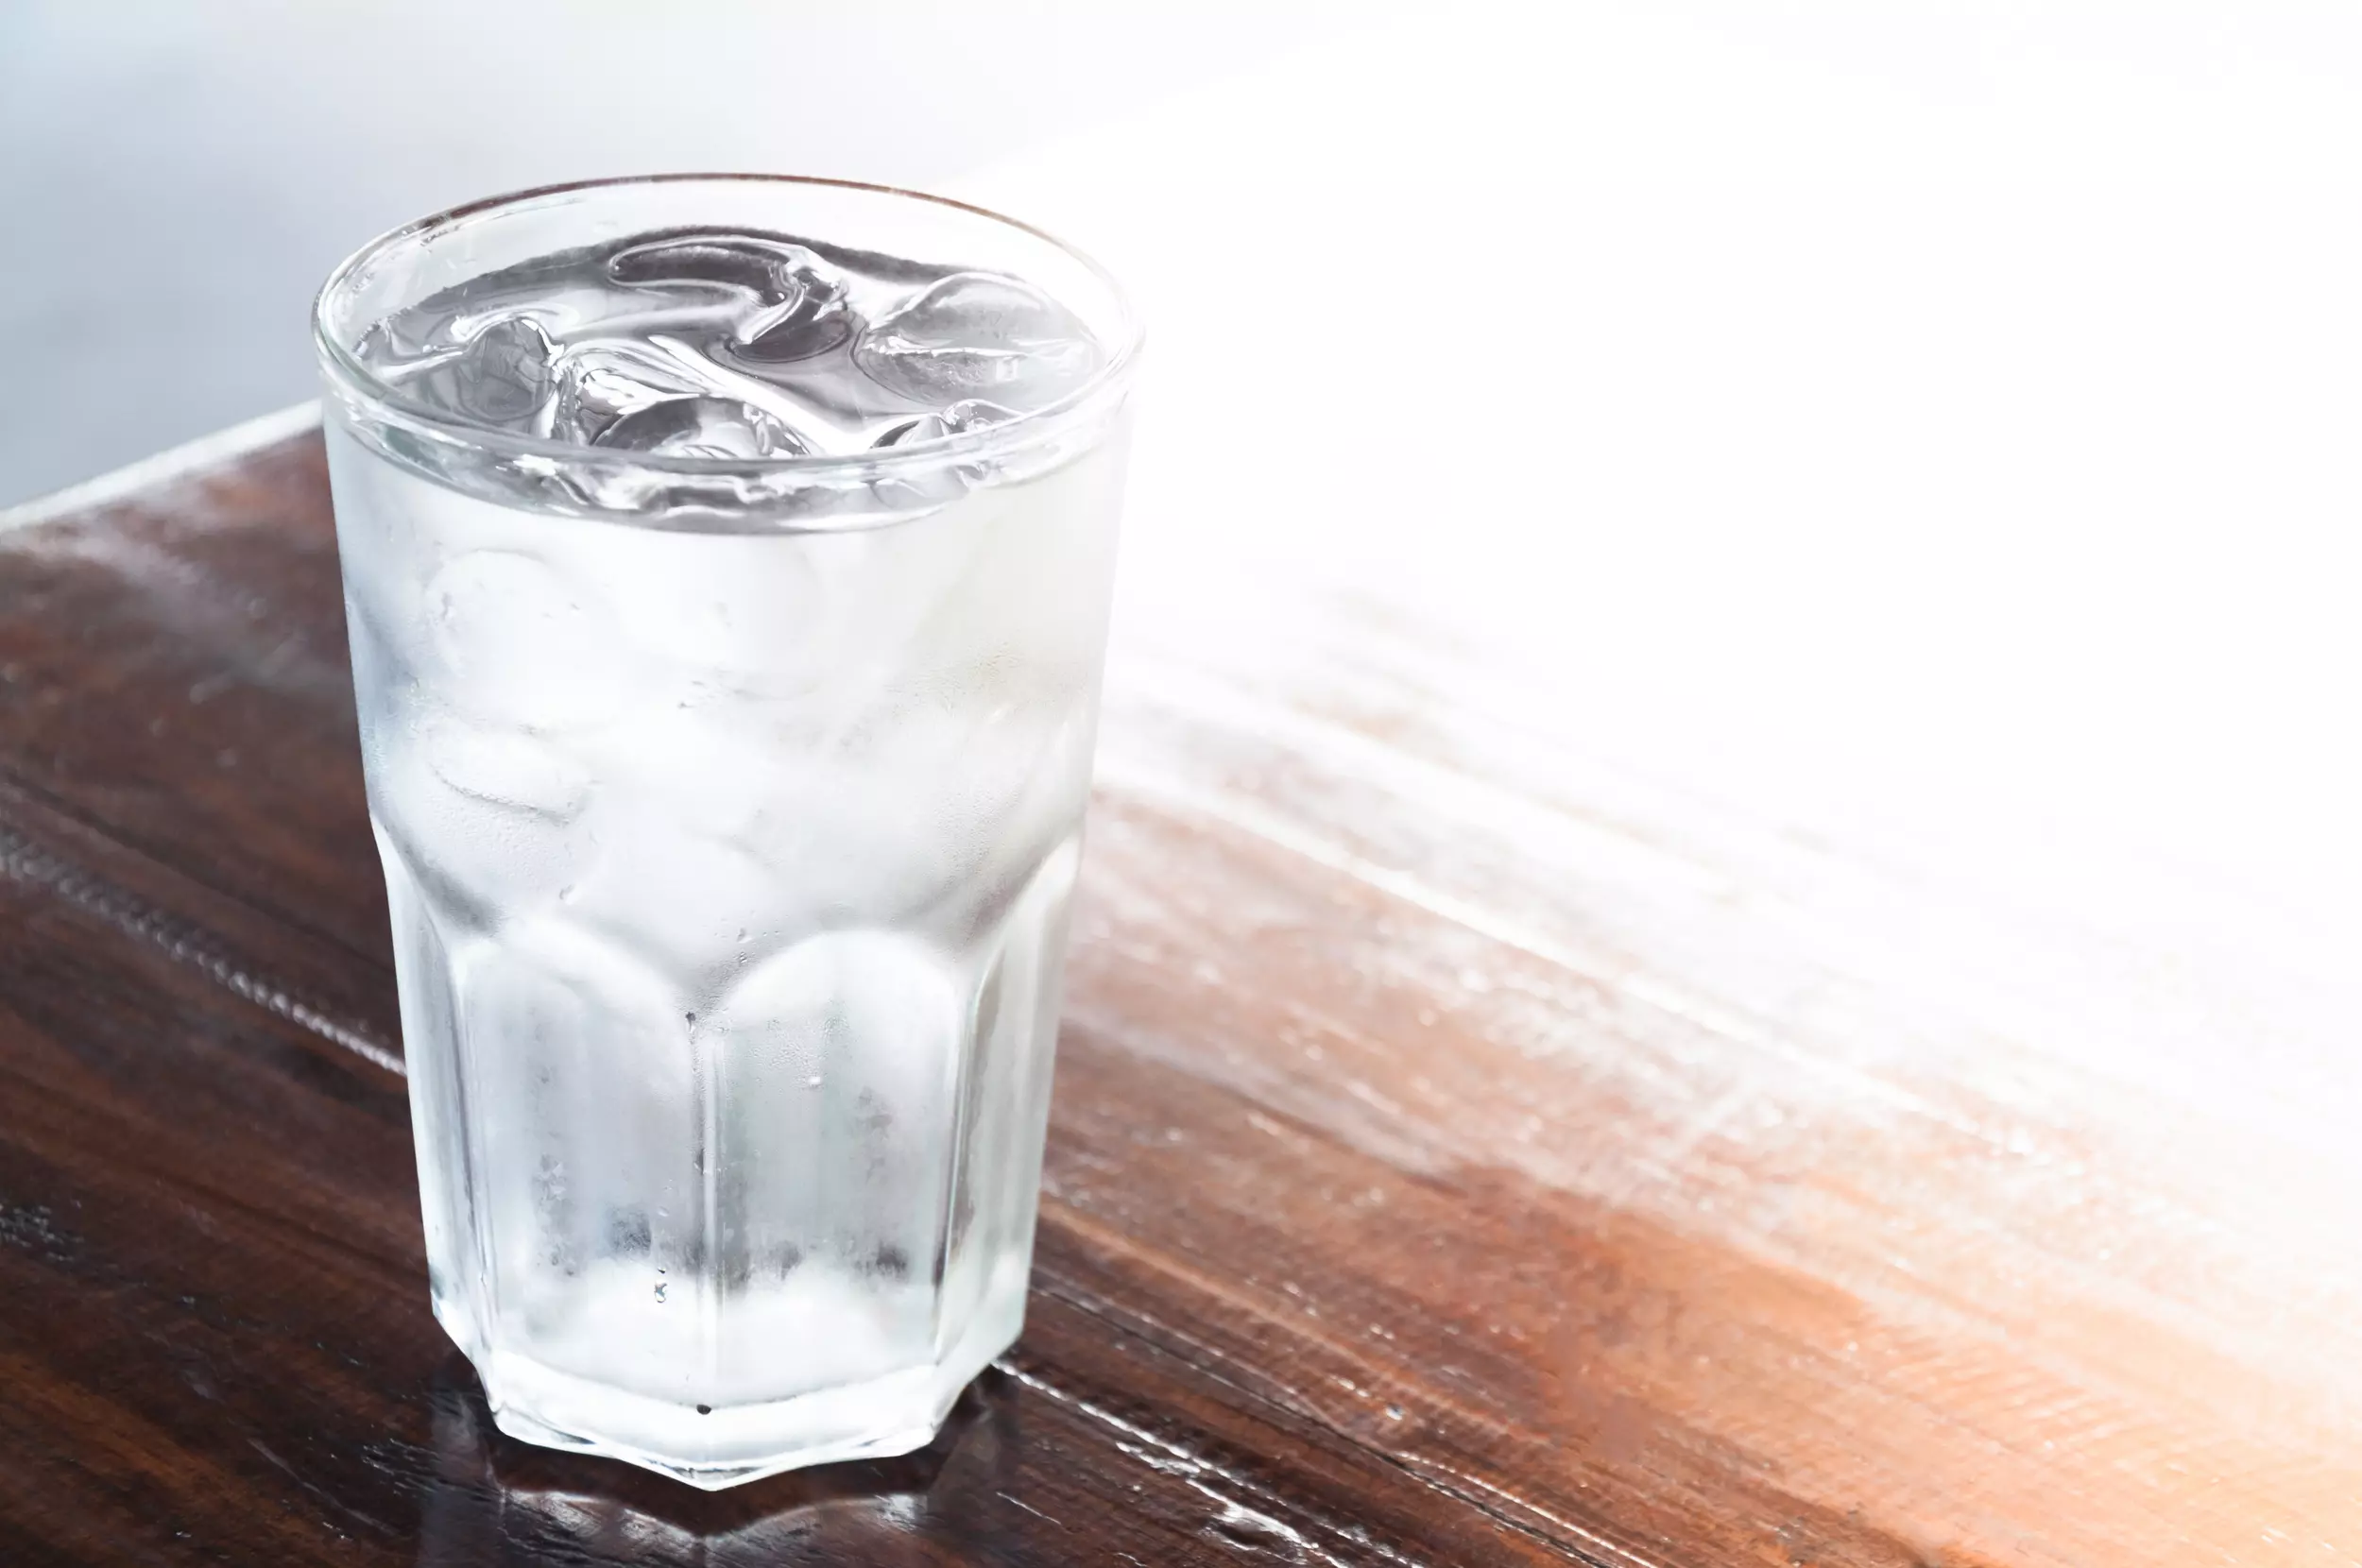 DON'T Drink Cold Water to Cool Down - Do This Instead